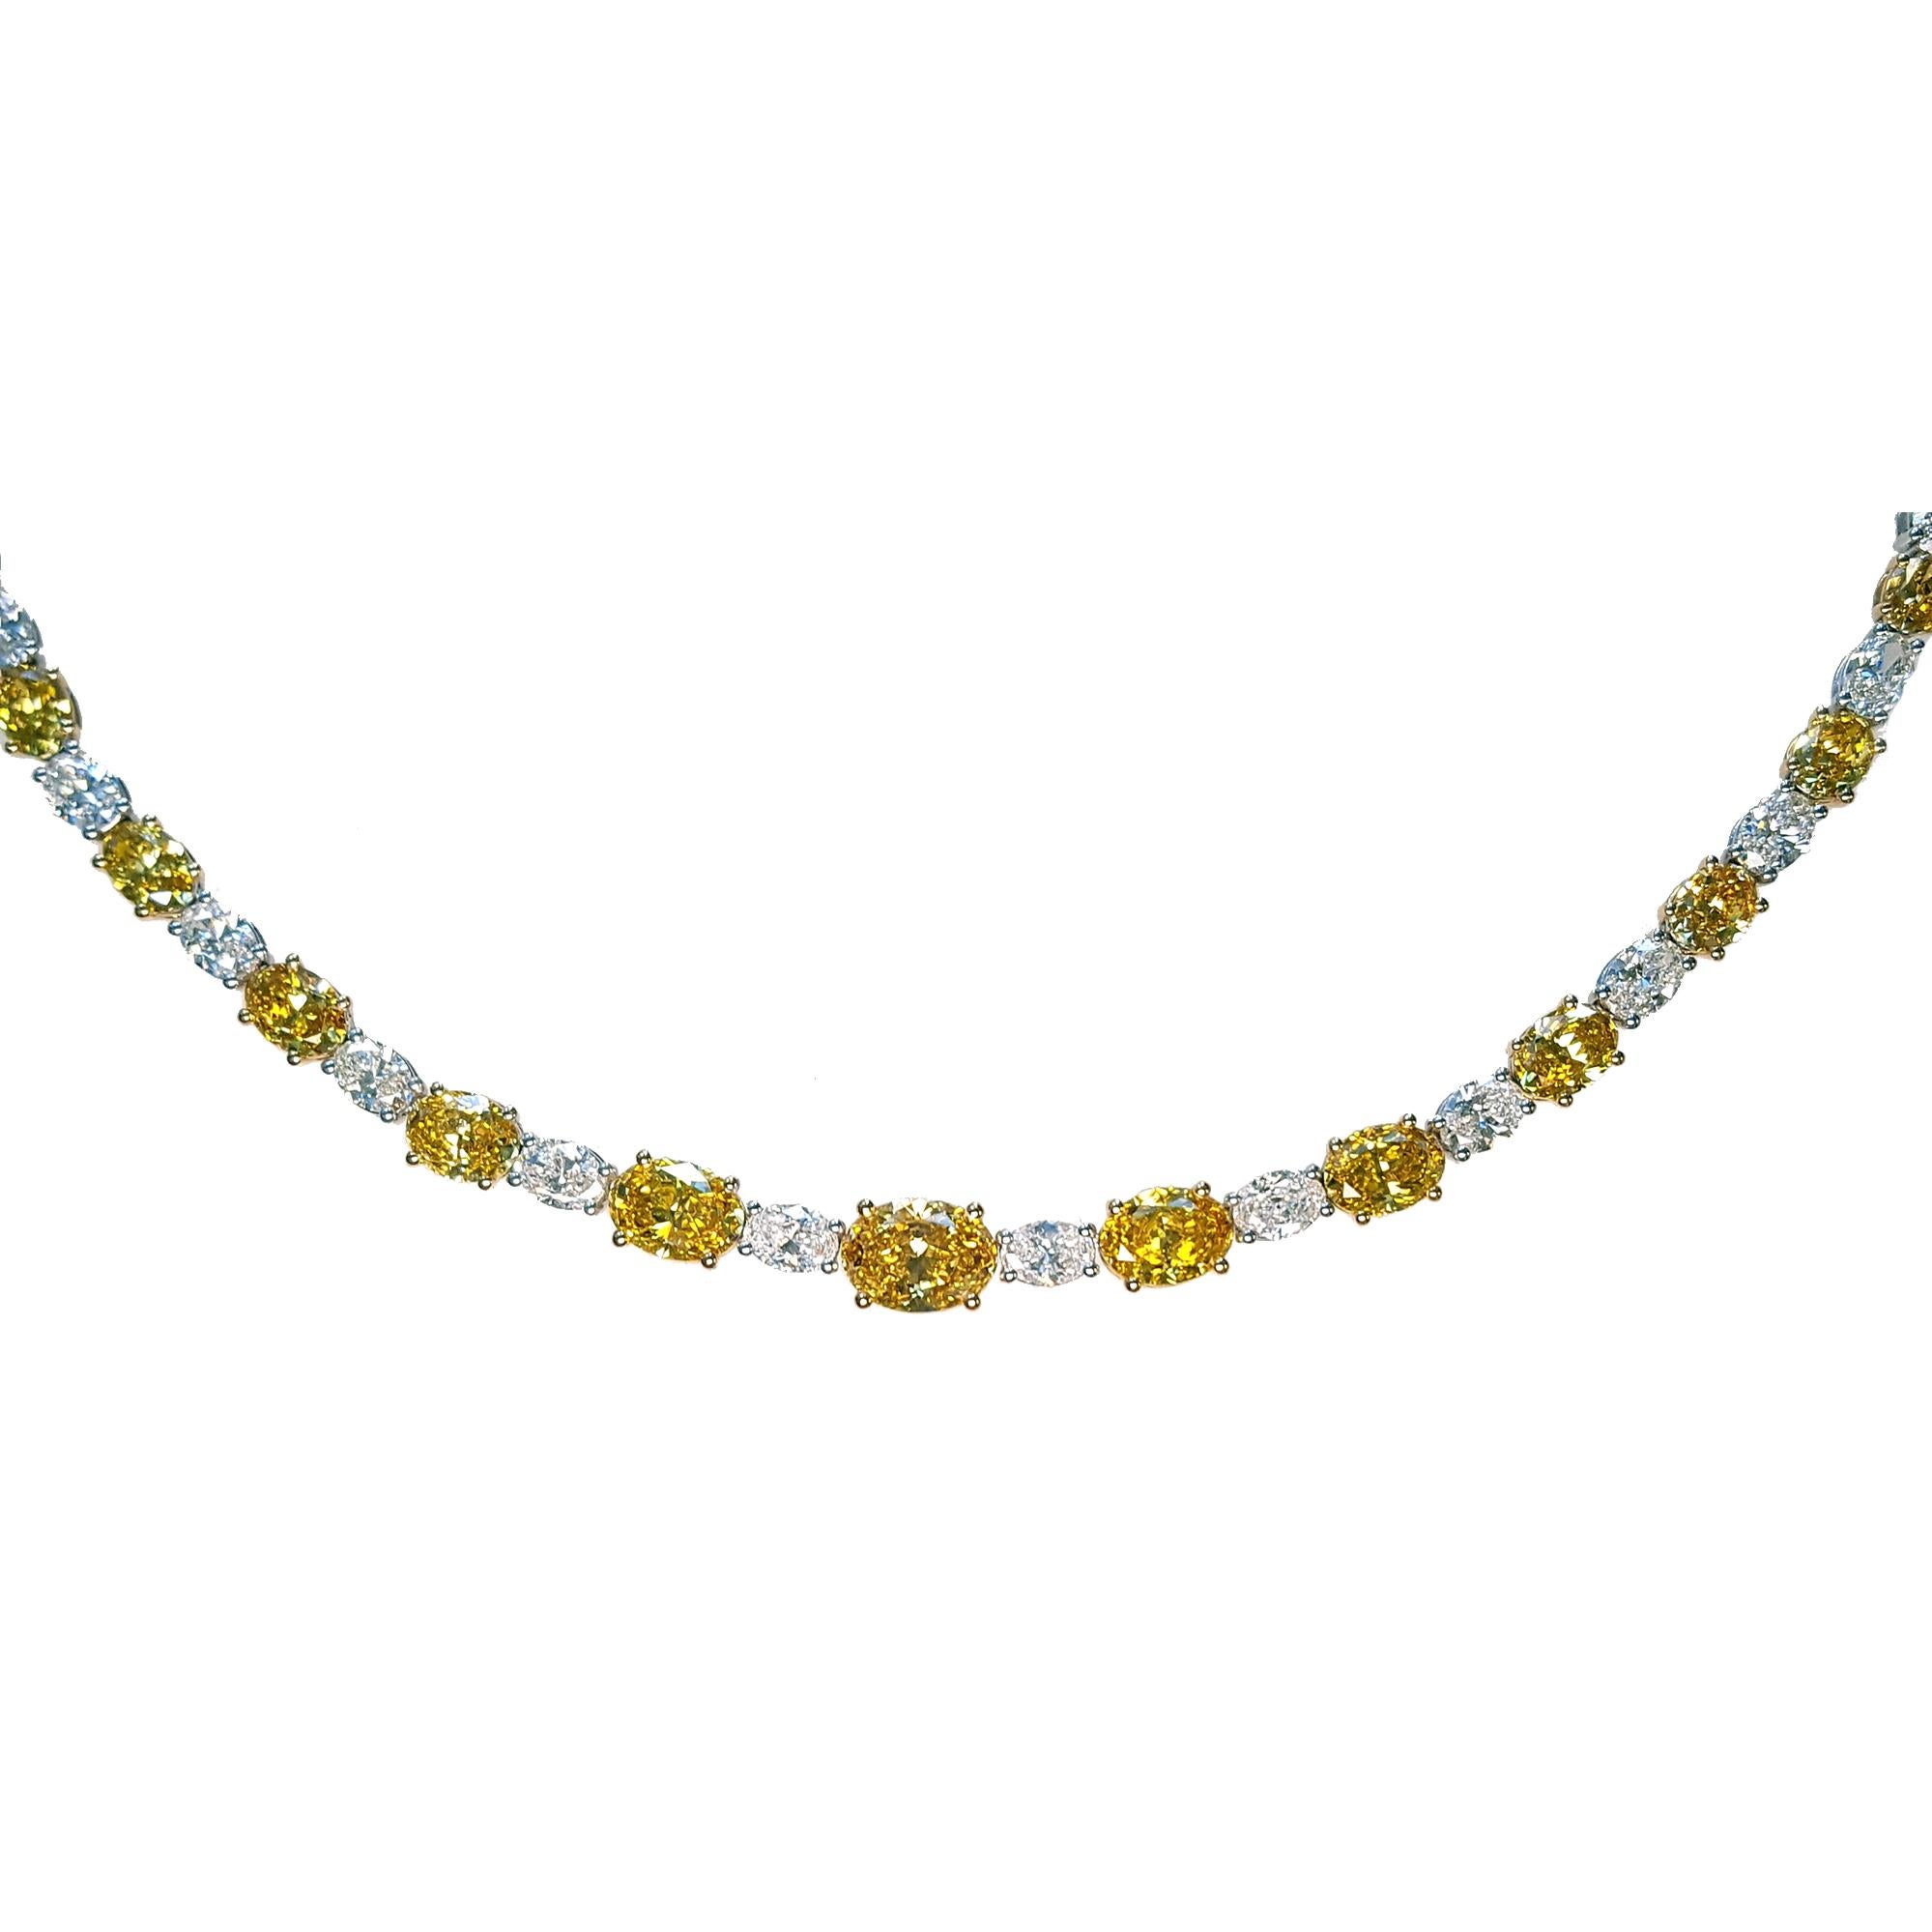 Contemporary 20.55 Carat Red Carpet Fancy Vivid Yellow & White Diamonds Necklace, 18K Gold. For Sale